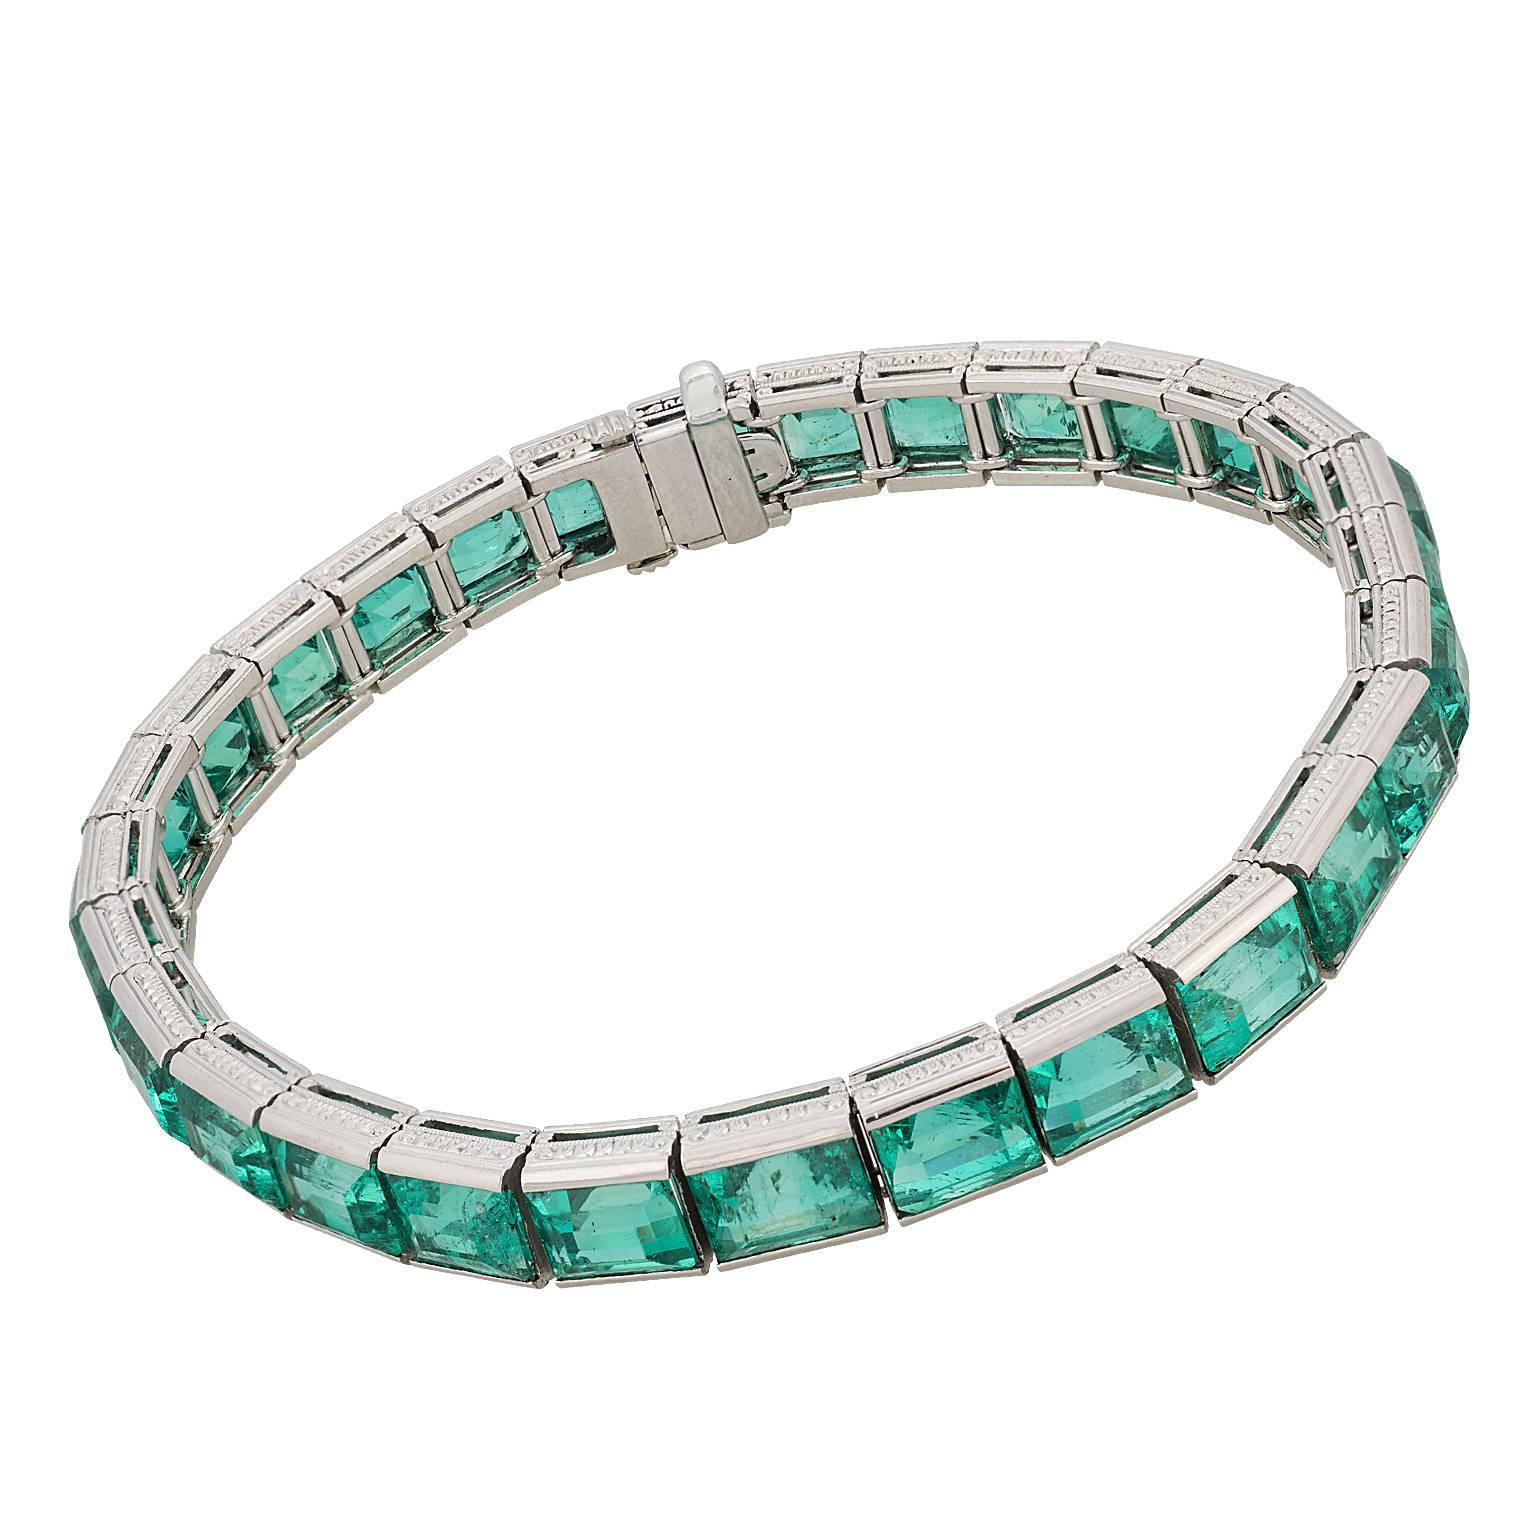 29.25 carats natural Colombian emerald bracelet in platinum.  There are 29 uniform color emerald cut emeralds, accompanied by a report from the American Gemological Laboratories (AGL) stating the origin of Colombia, as well as insignificant to minor